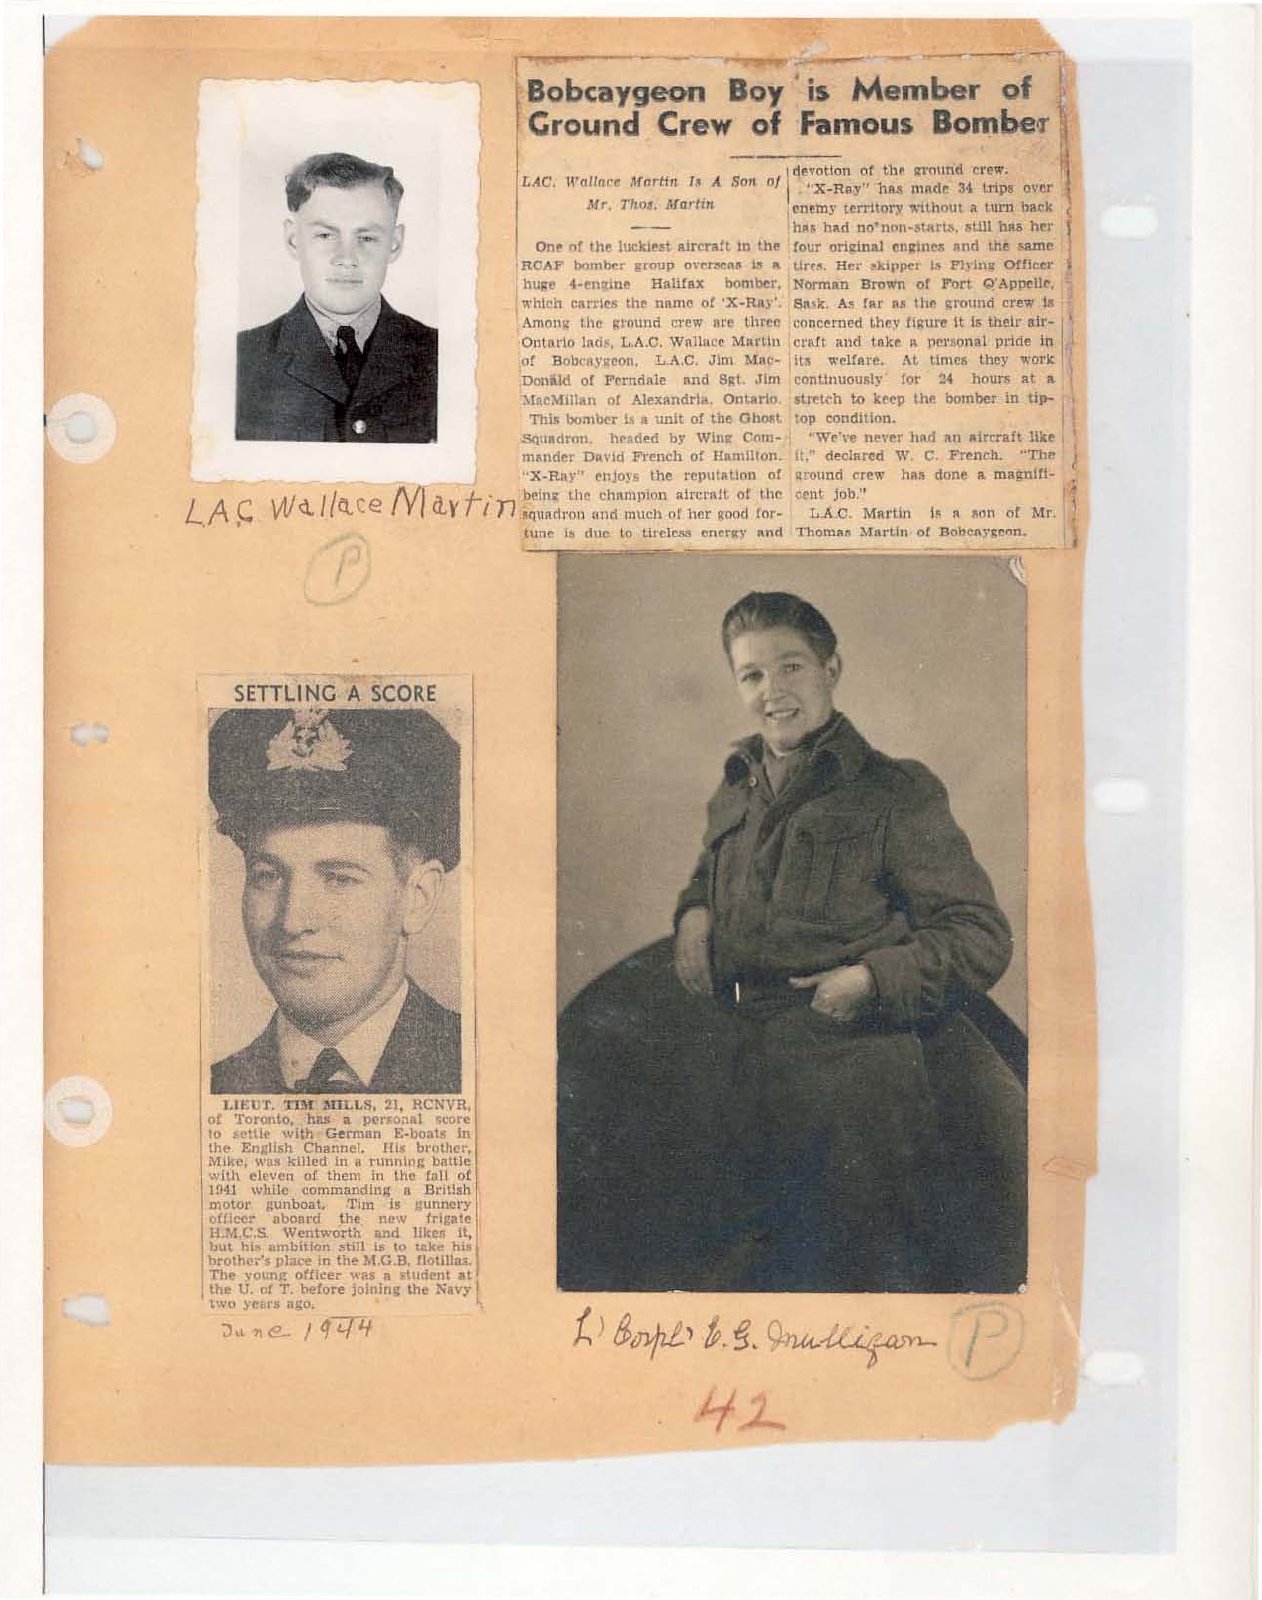 Page 45: Bobcaygeon Boy is Member of Ground Crew of Famous Bomber